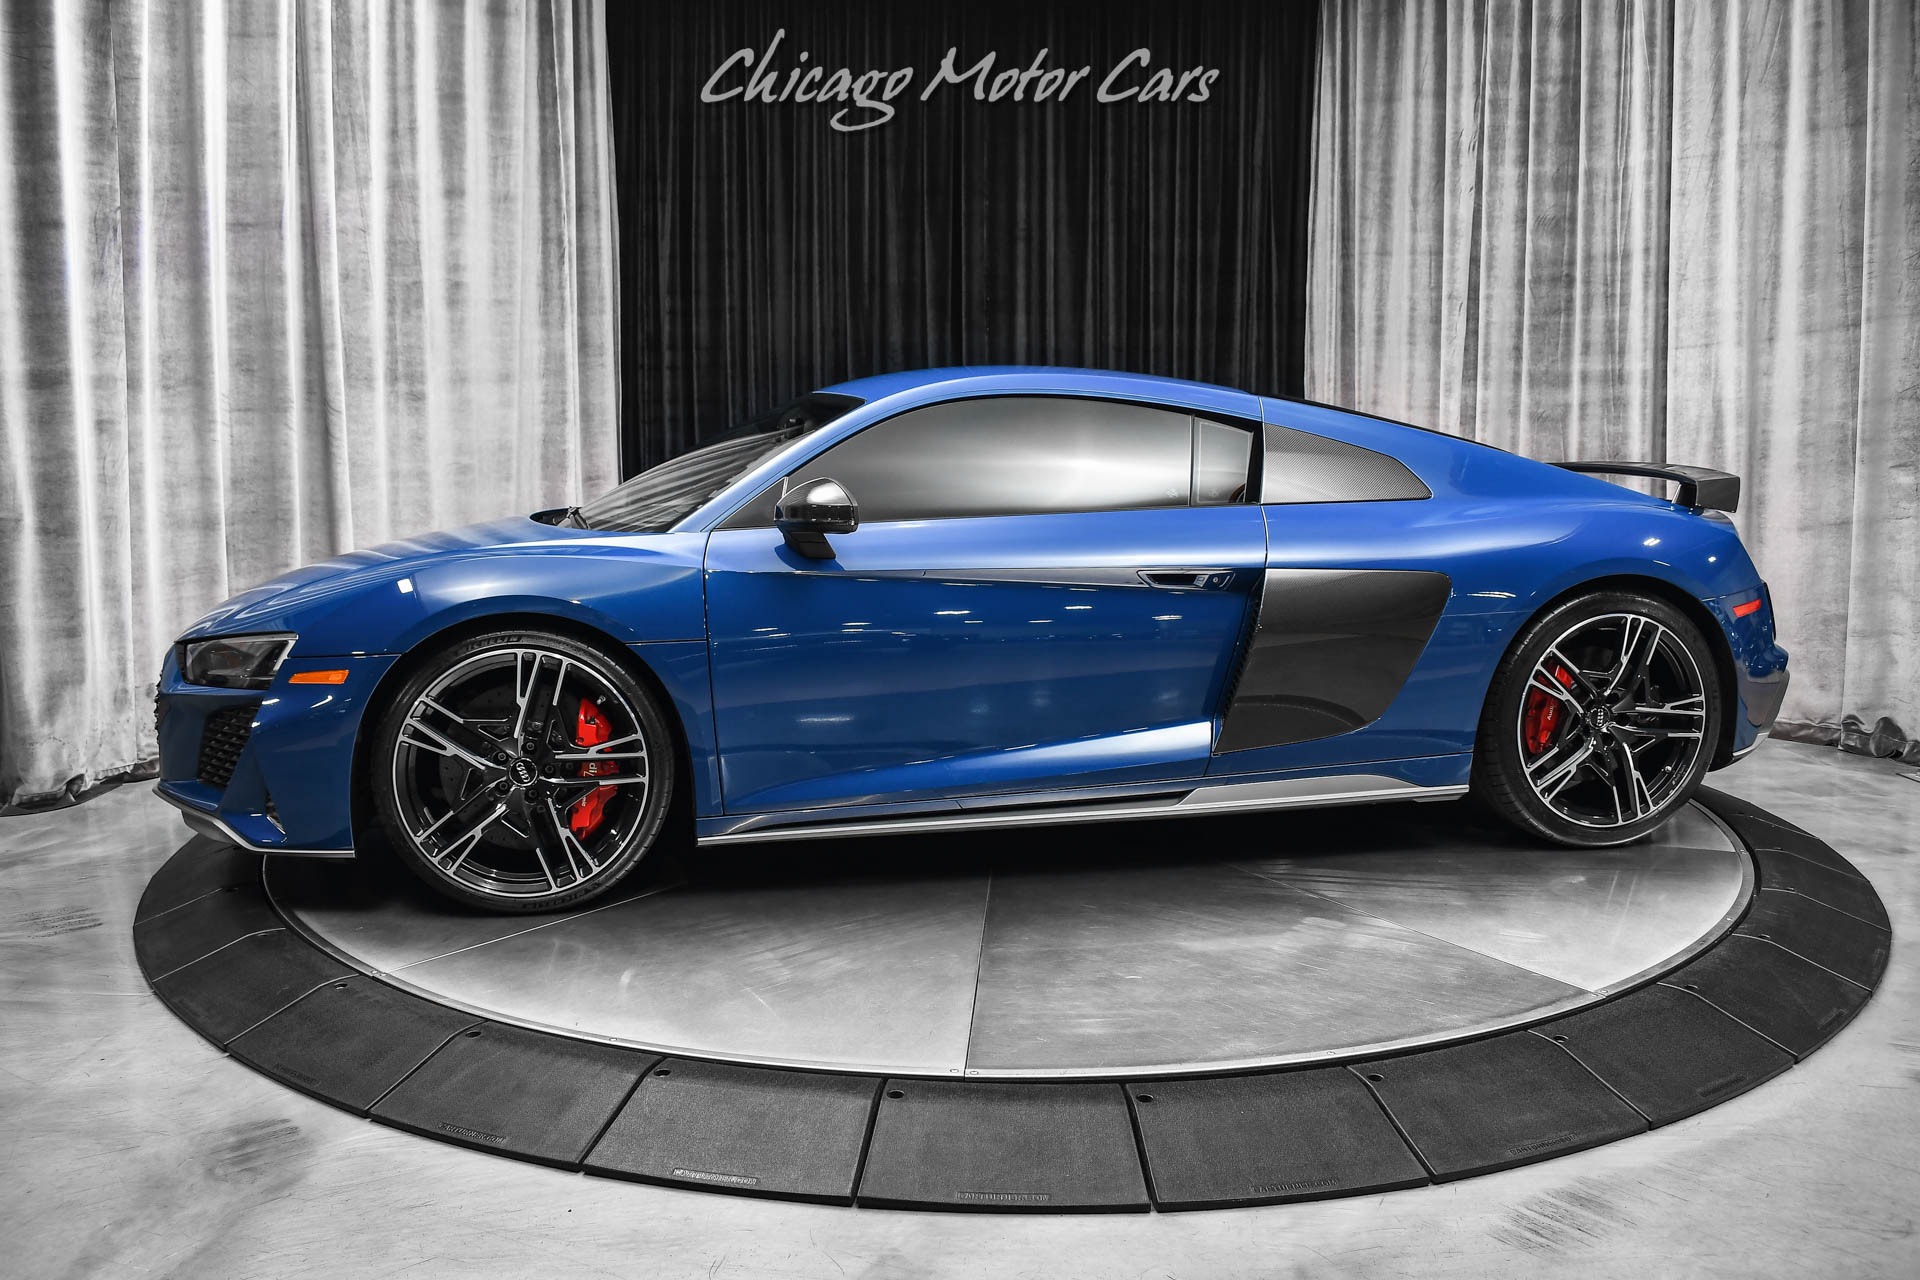 Used-2020-Audi-R8-52-quattro-V10-Performance-Coupe-Sport-Seat-Pkg-Twin-Turbo-800-HP